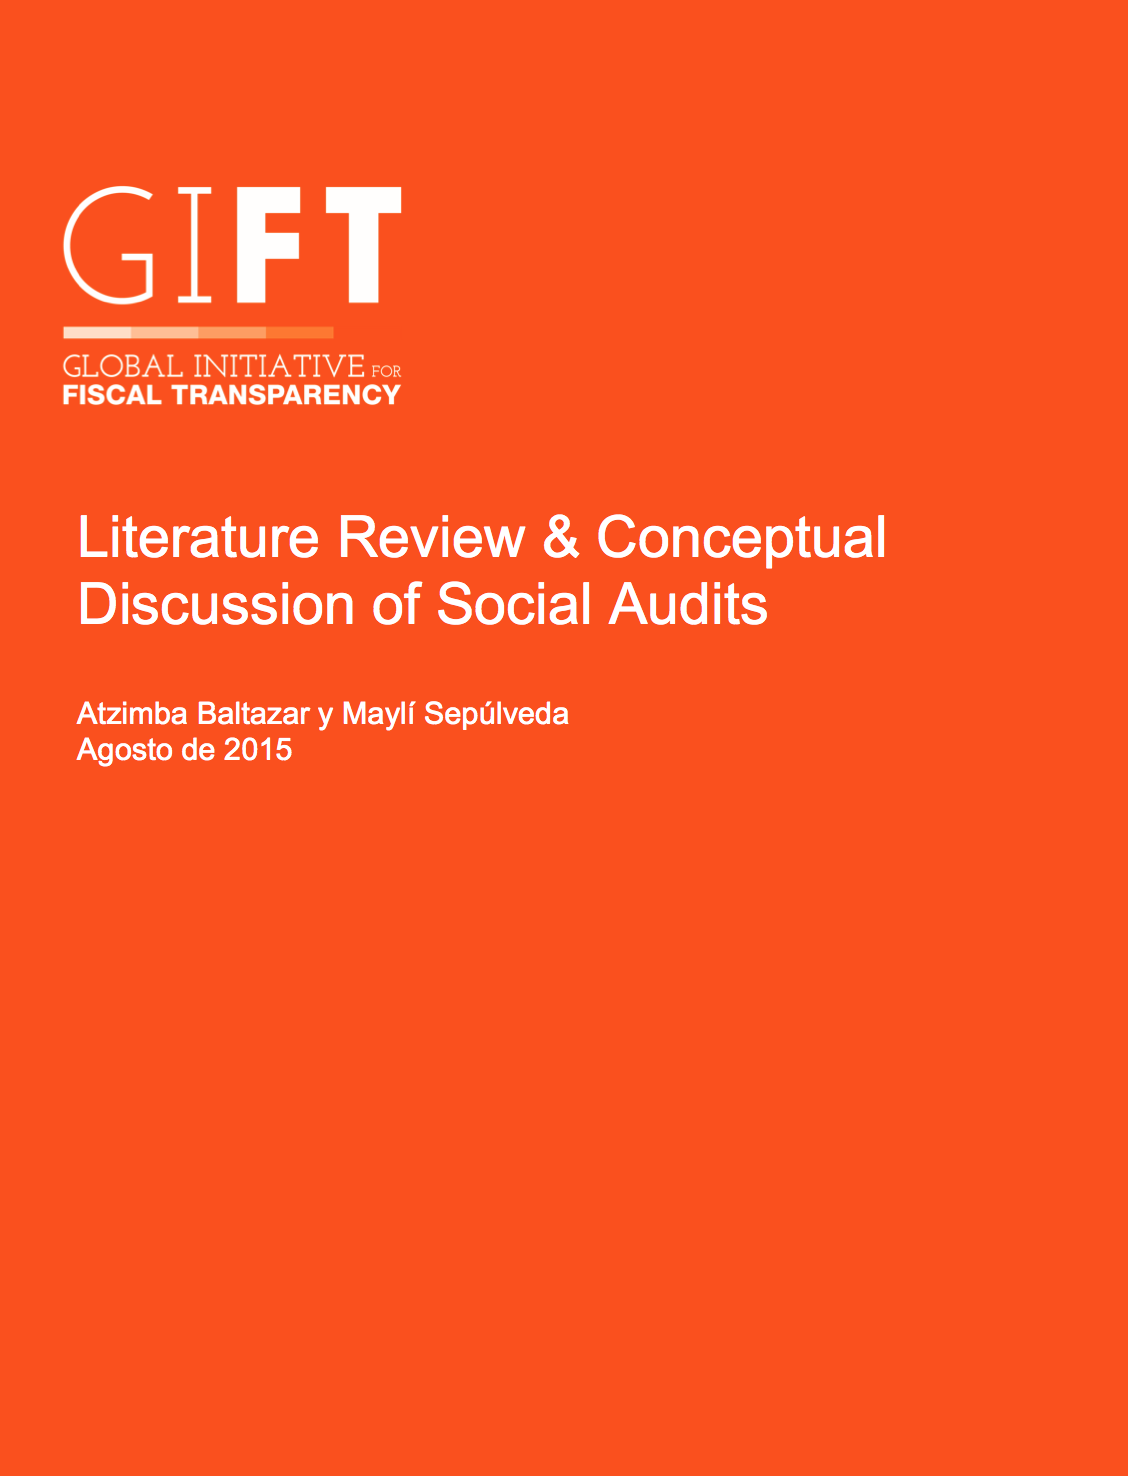 Literature Review & Conceptual Discussion of Social Audits